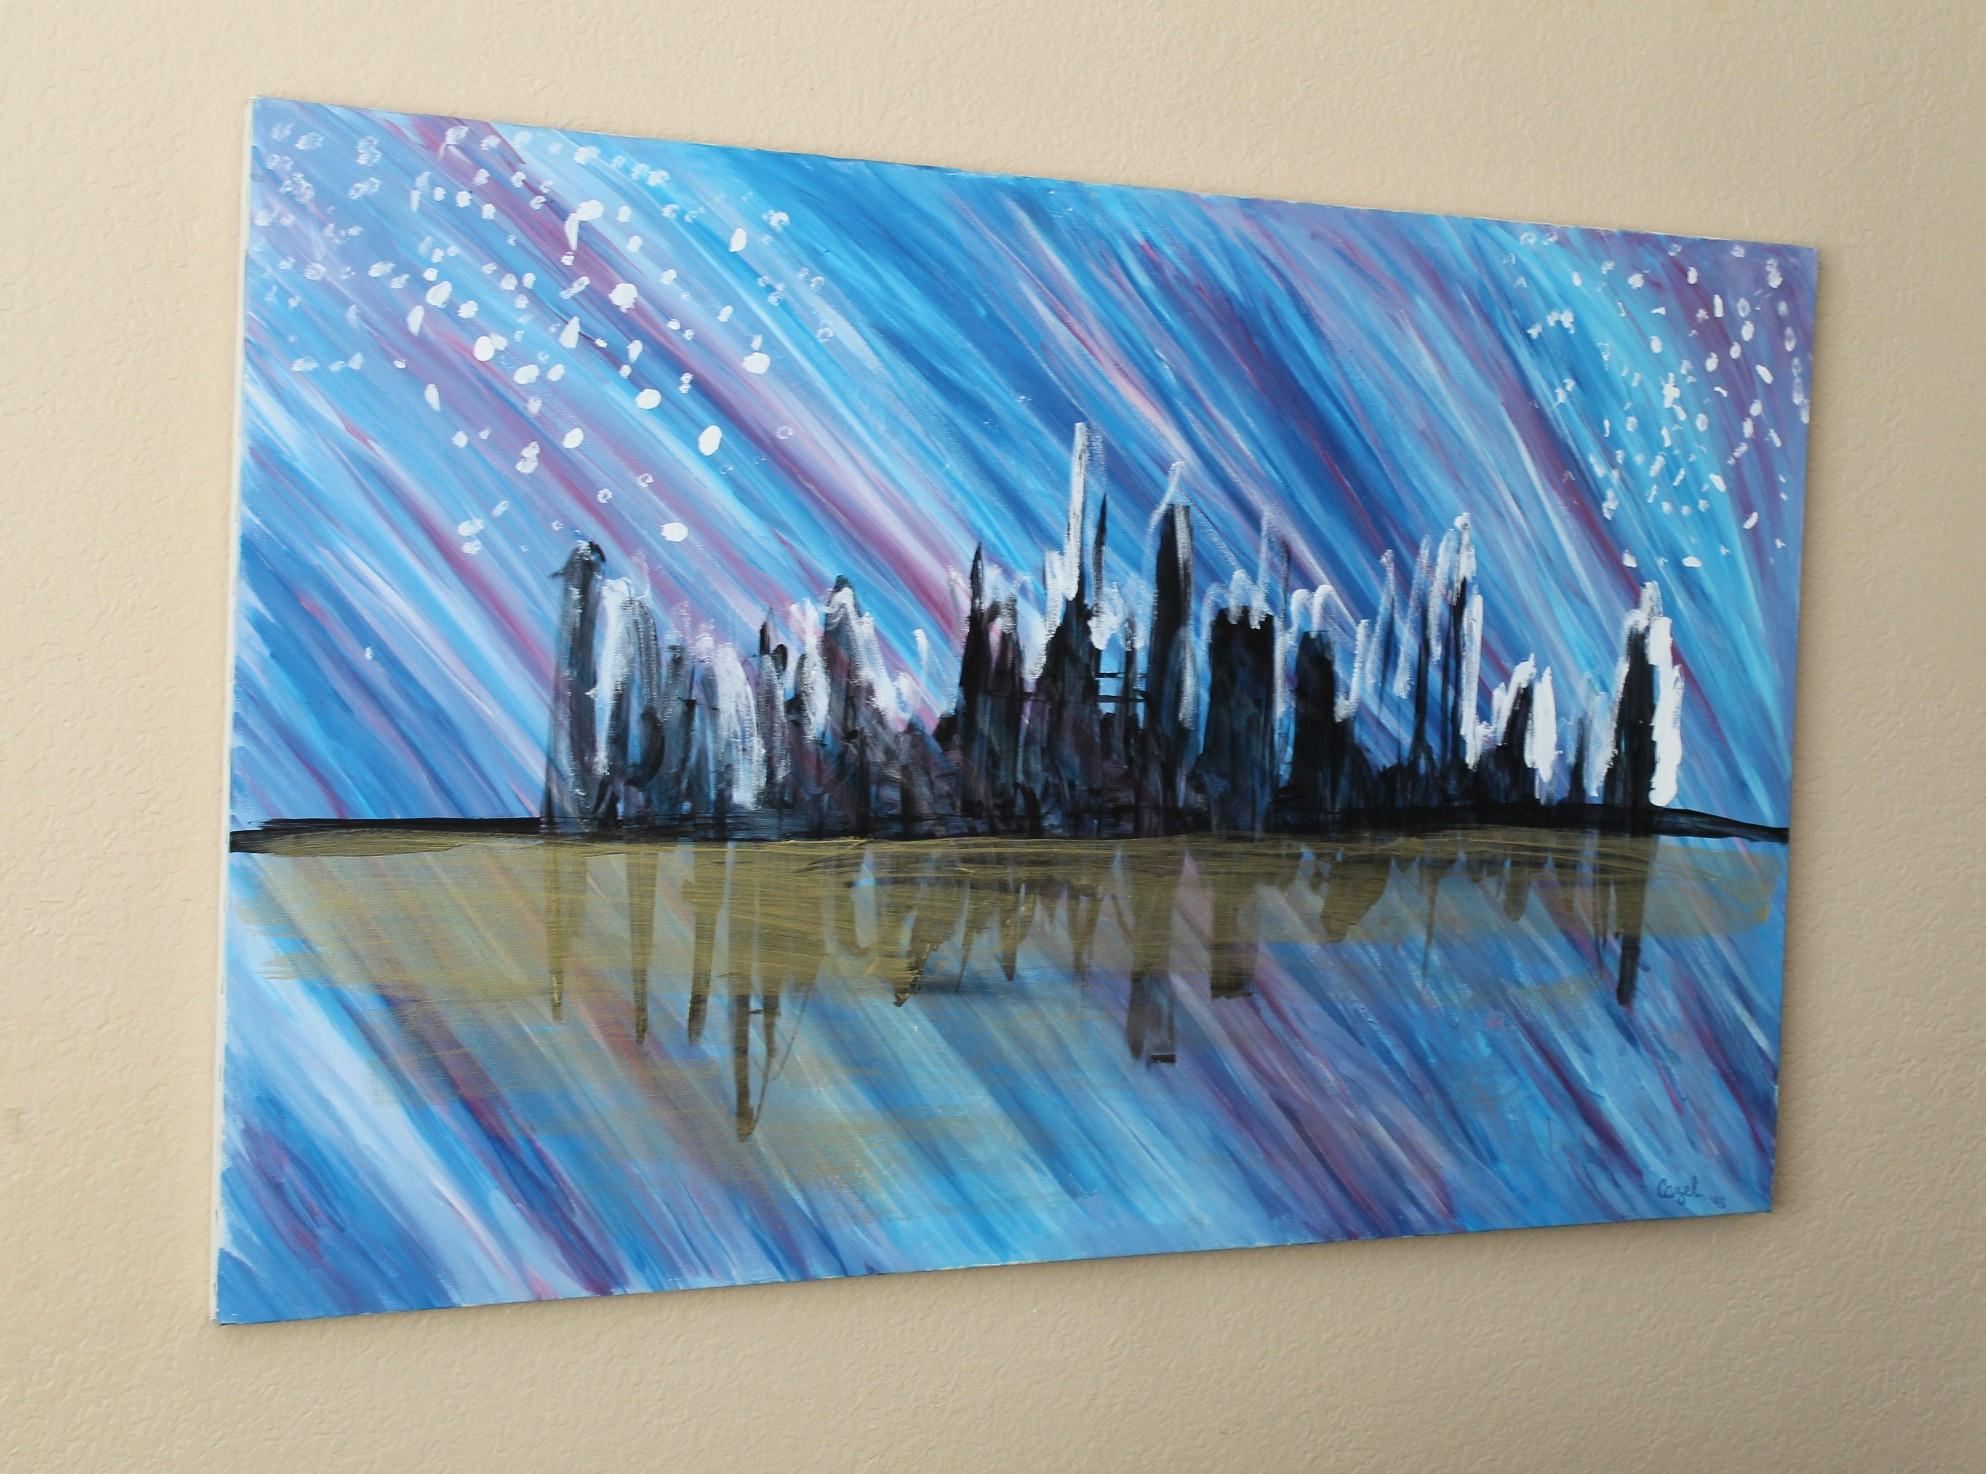 Original 20th Century Abstract Cityscape Oil Painting  1990s MCM Decor 30 by 48 In Good Condition For Sale In Peoria, AZ